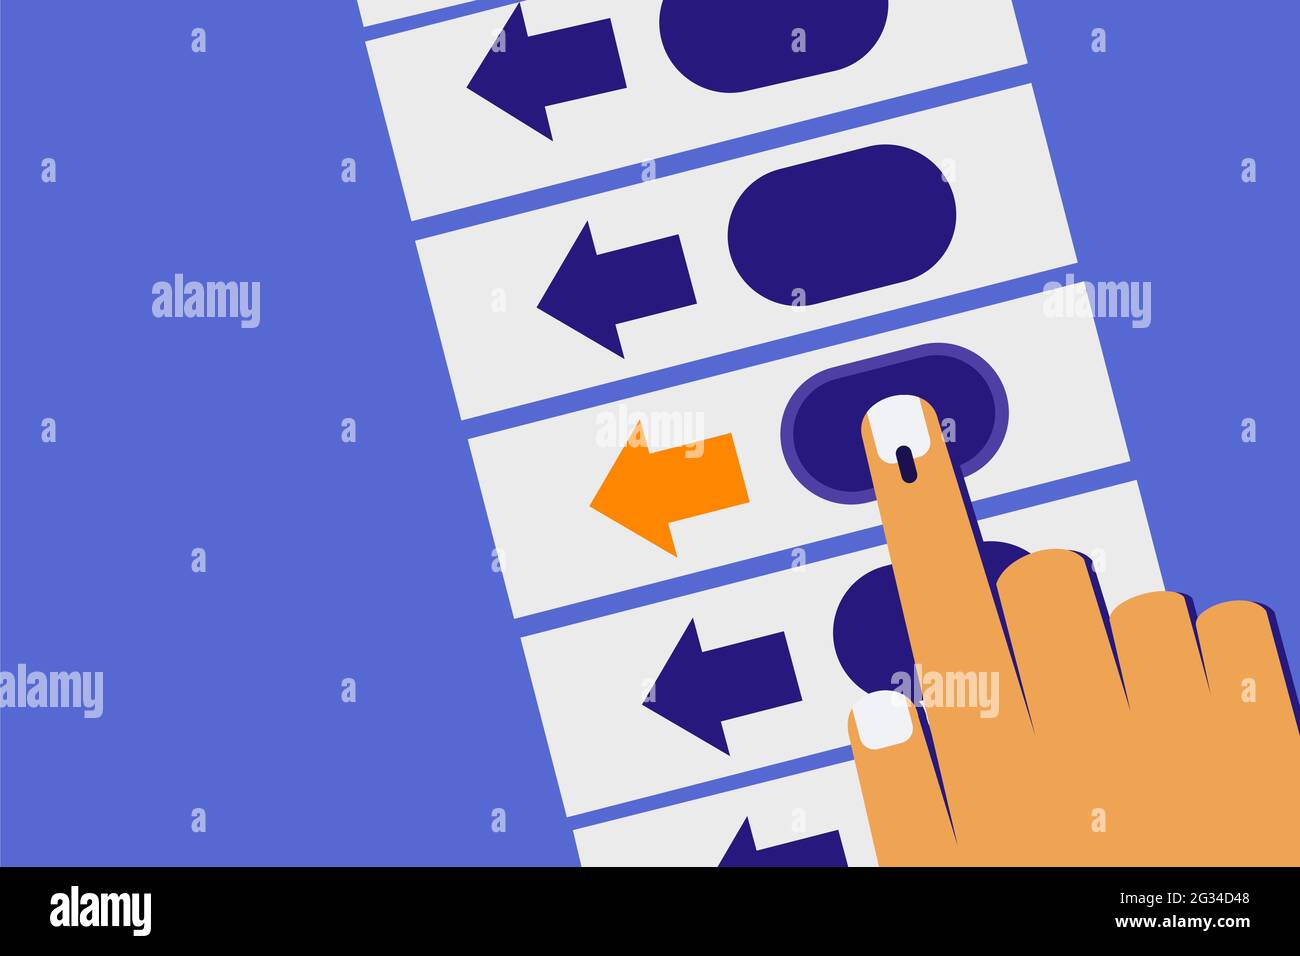 Hand casting vote in Electronic voting machine Stock Vector